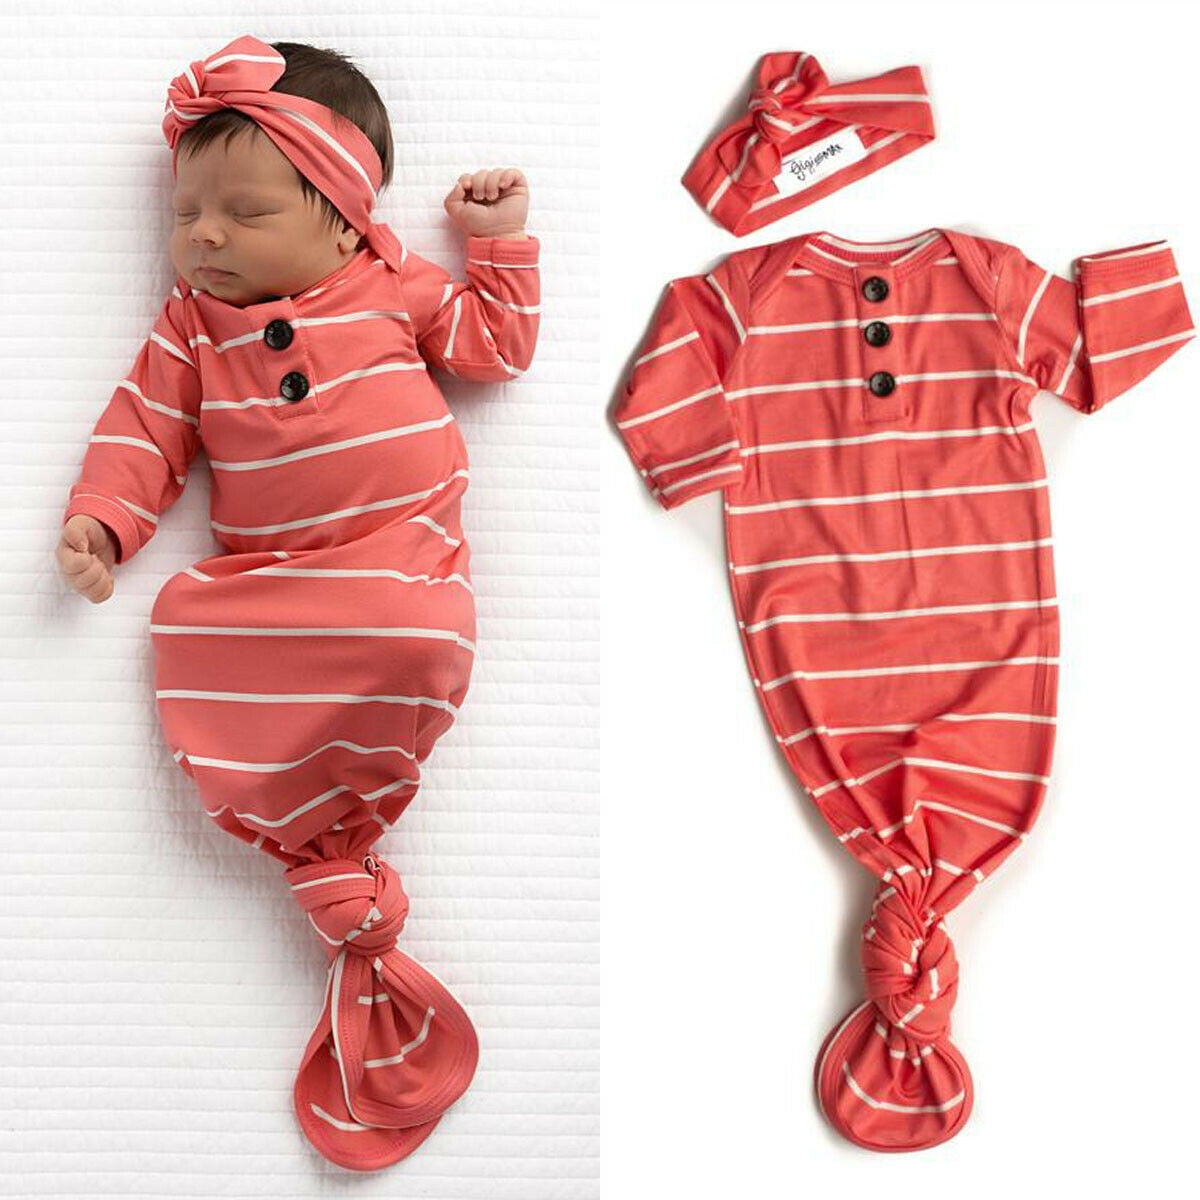 Newborn Baby Girl Floral Sleepwear Nightgowns with Headband Sleeping Bags Coming Home Outfits 0-6Months 